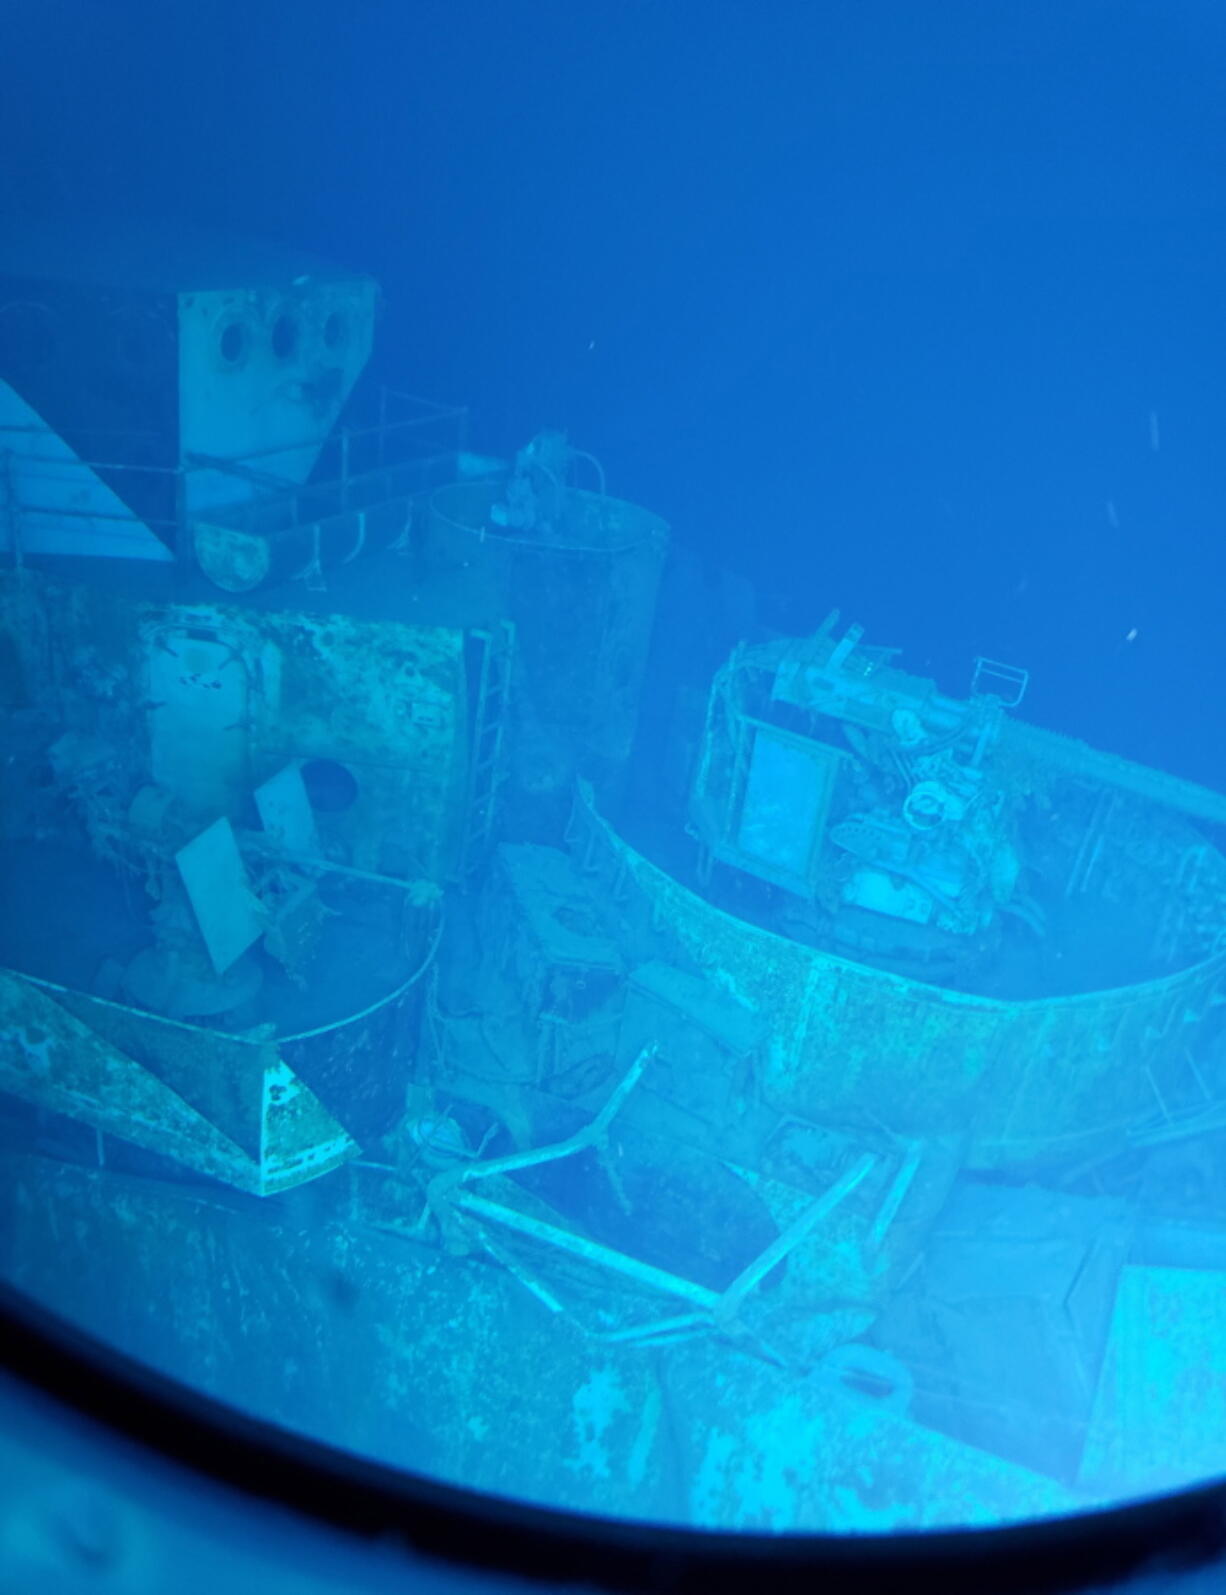 The pilot house section of the USS Samuel B. Roberts can be seen underwater Wednesday off the Philippines in the Western Pacific Ocean. The U.S.